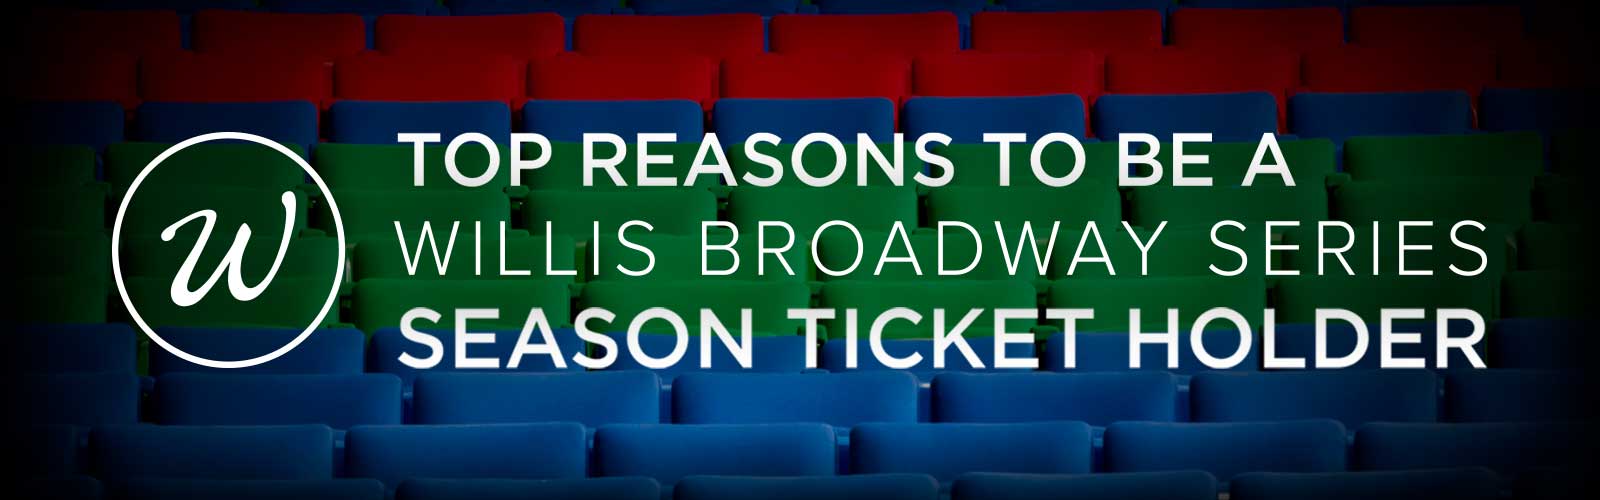 Top reasons to be a broadway season ticket holder